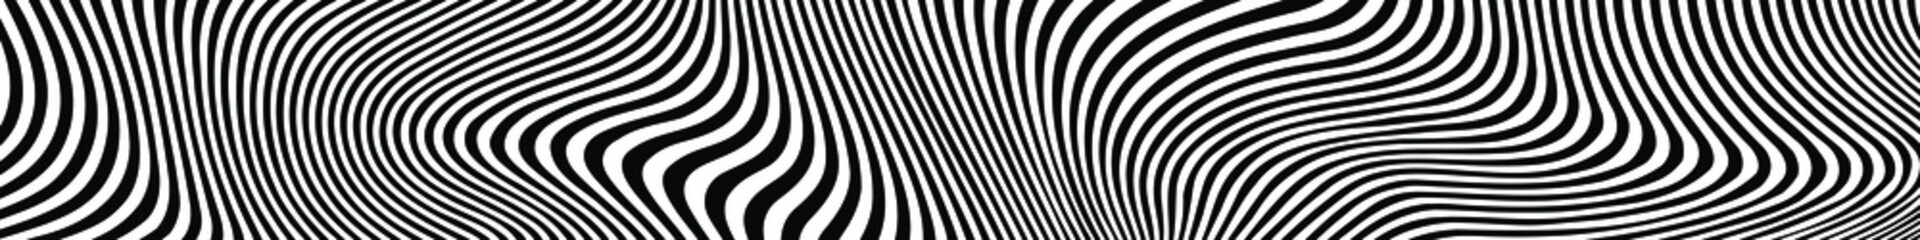 Abstract black and white striped curved lines background. Distortion effect vector illustration.